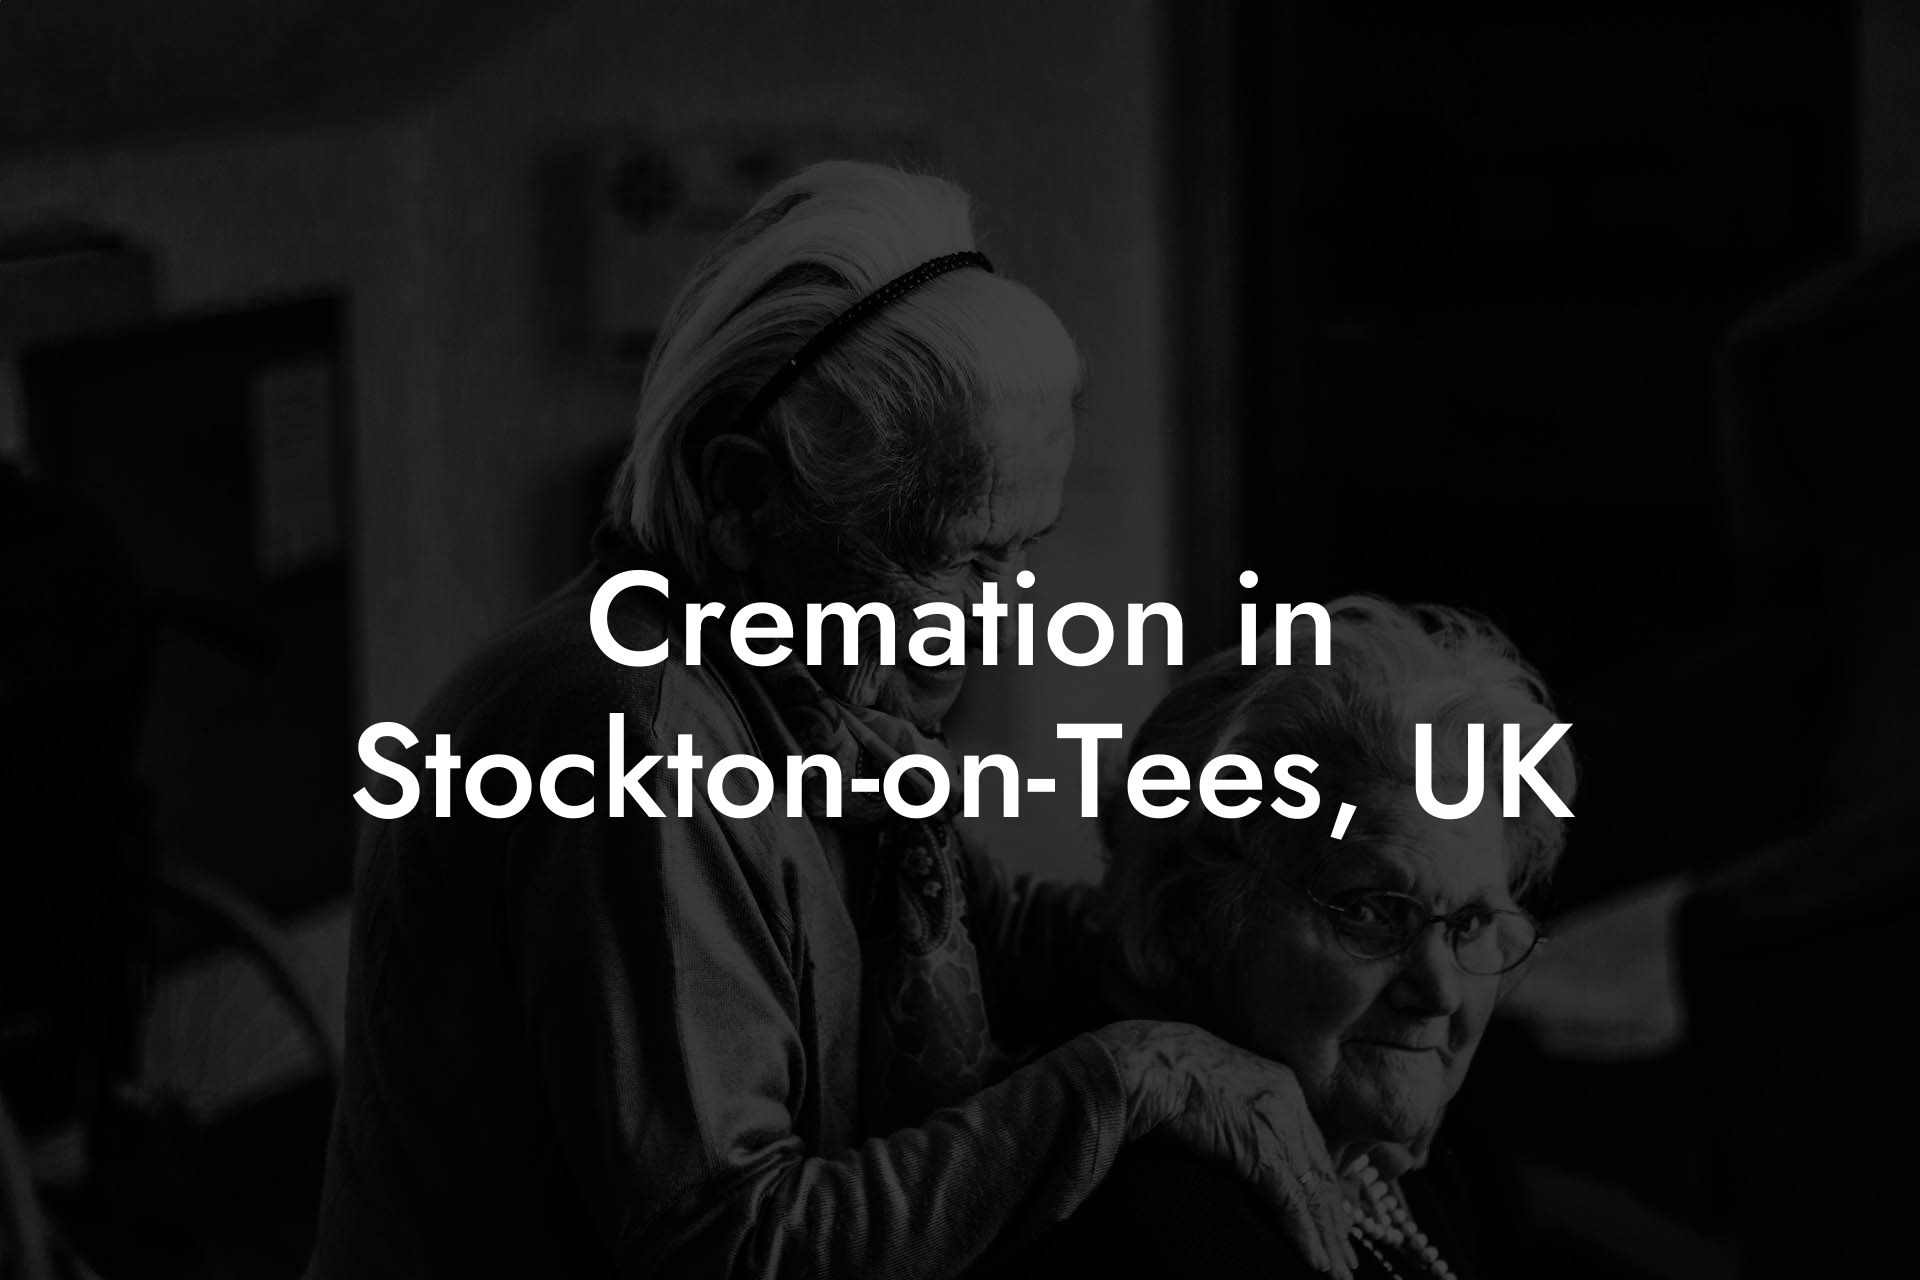 Cremation in Stockton-on-Tees, UK